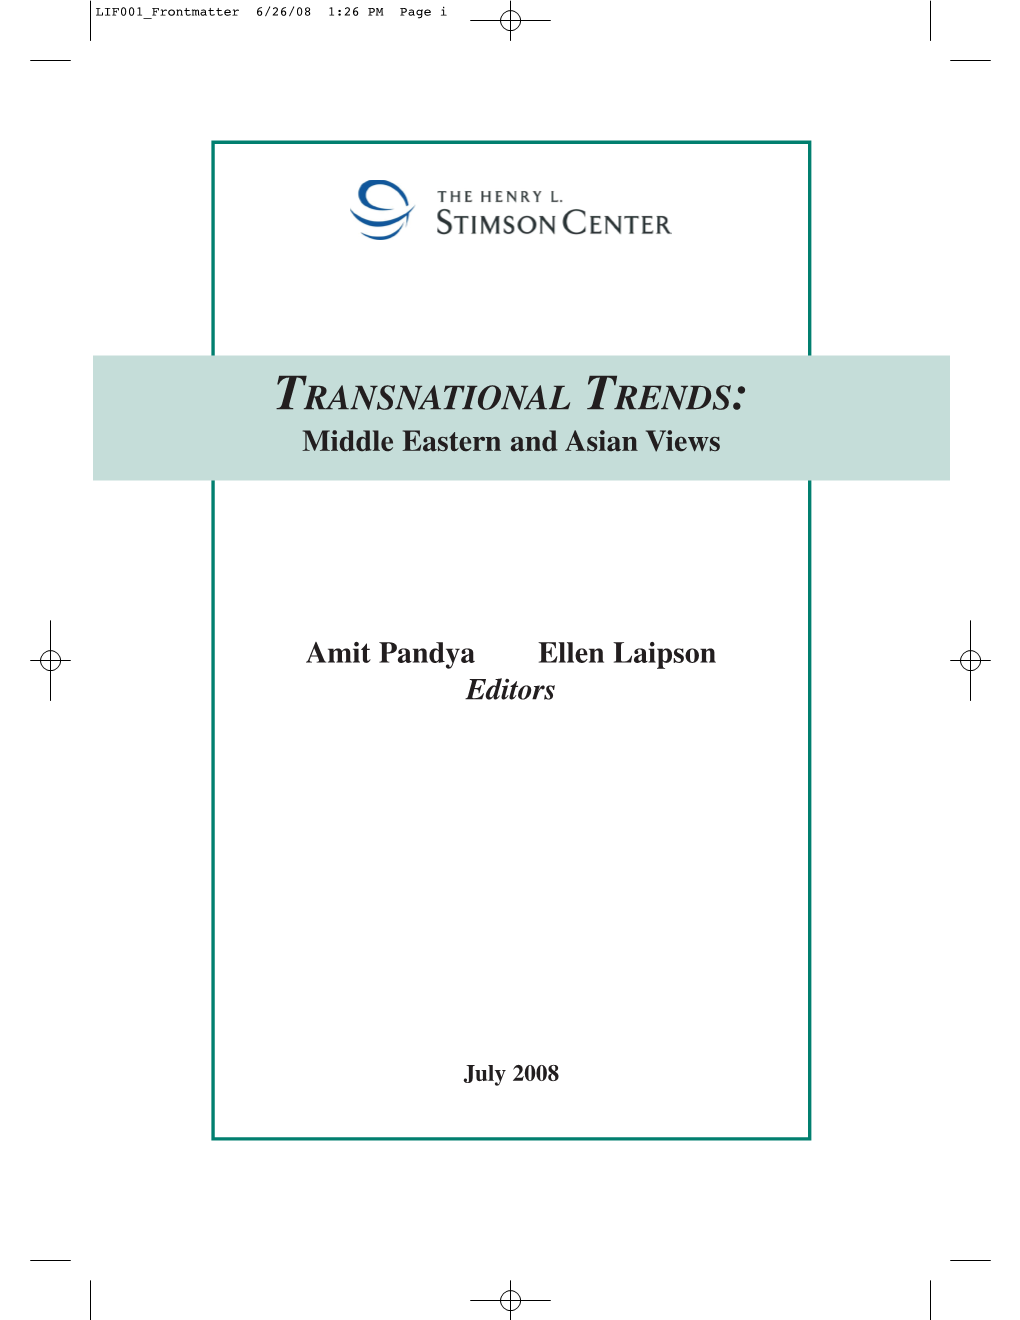 TRANSNATIONAL TRENDS: Middle Eastern and Asian Views